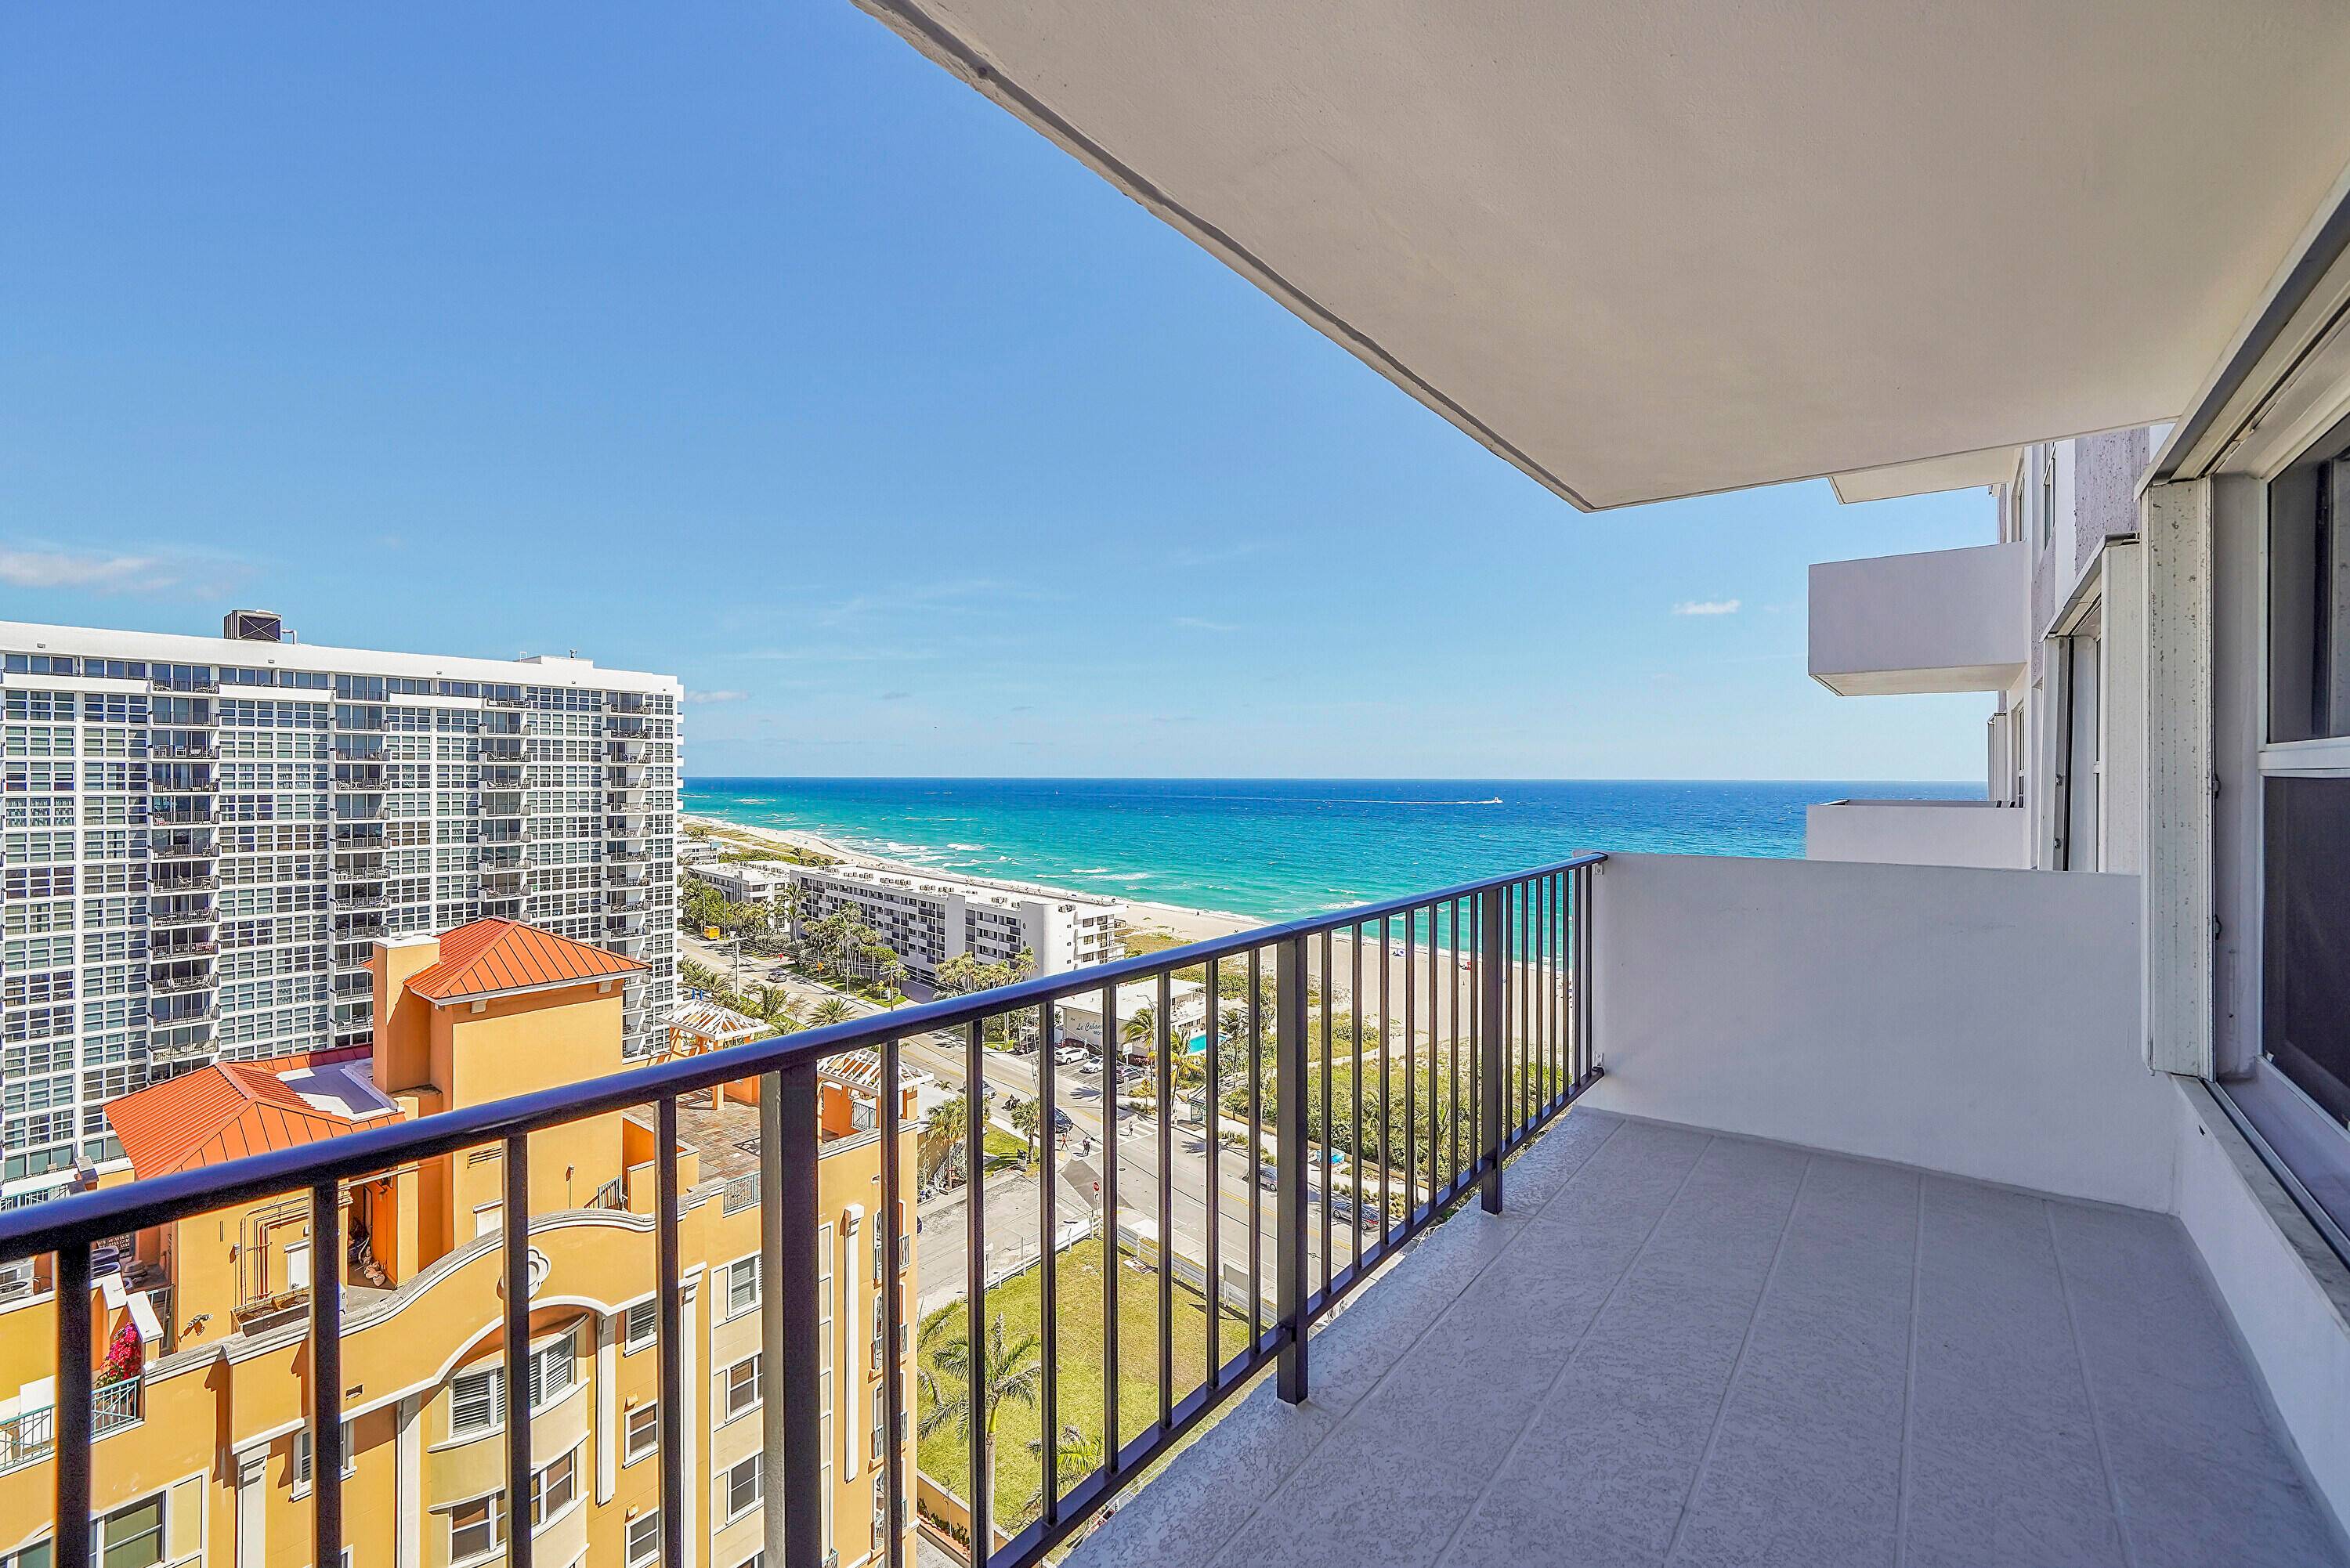 This impressively renovated two bedroom, two full bathroom condo is situated on the 15th floor, providing breathtaking views of both the ocean and the intracoastal.